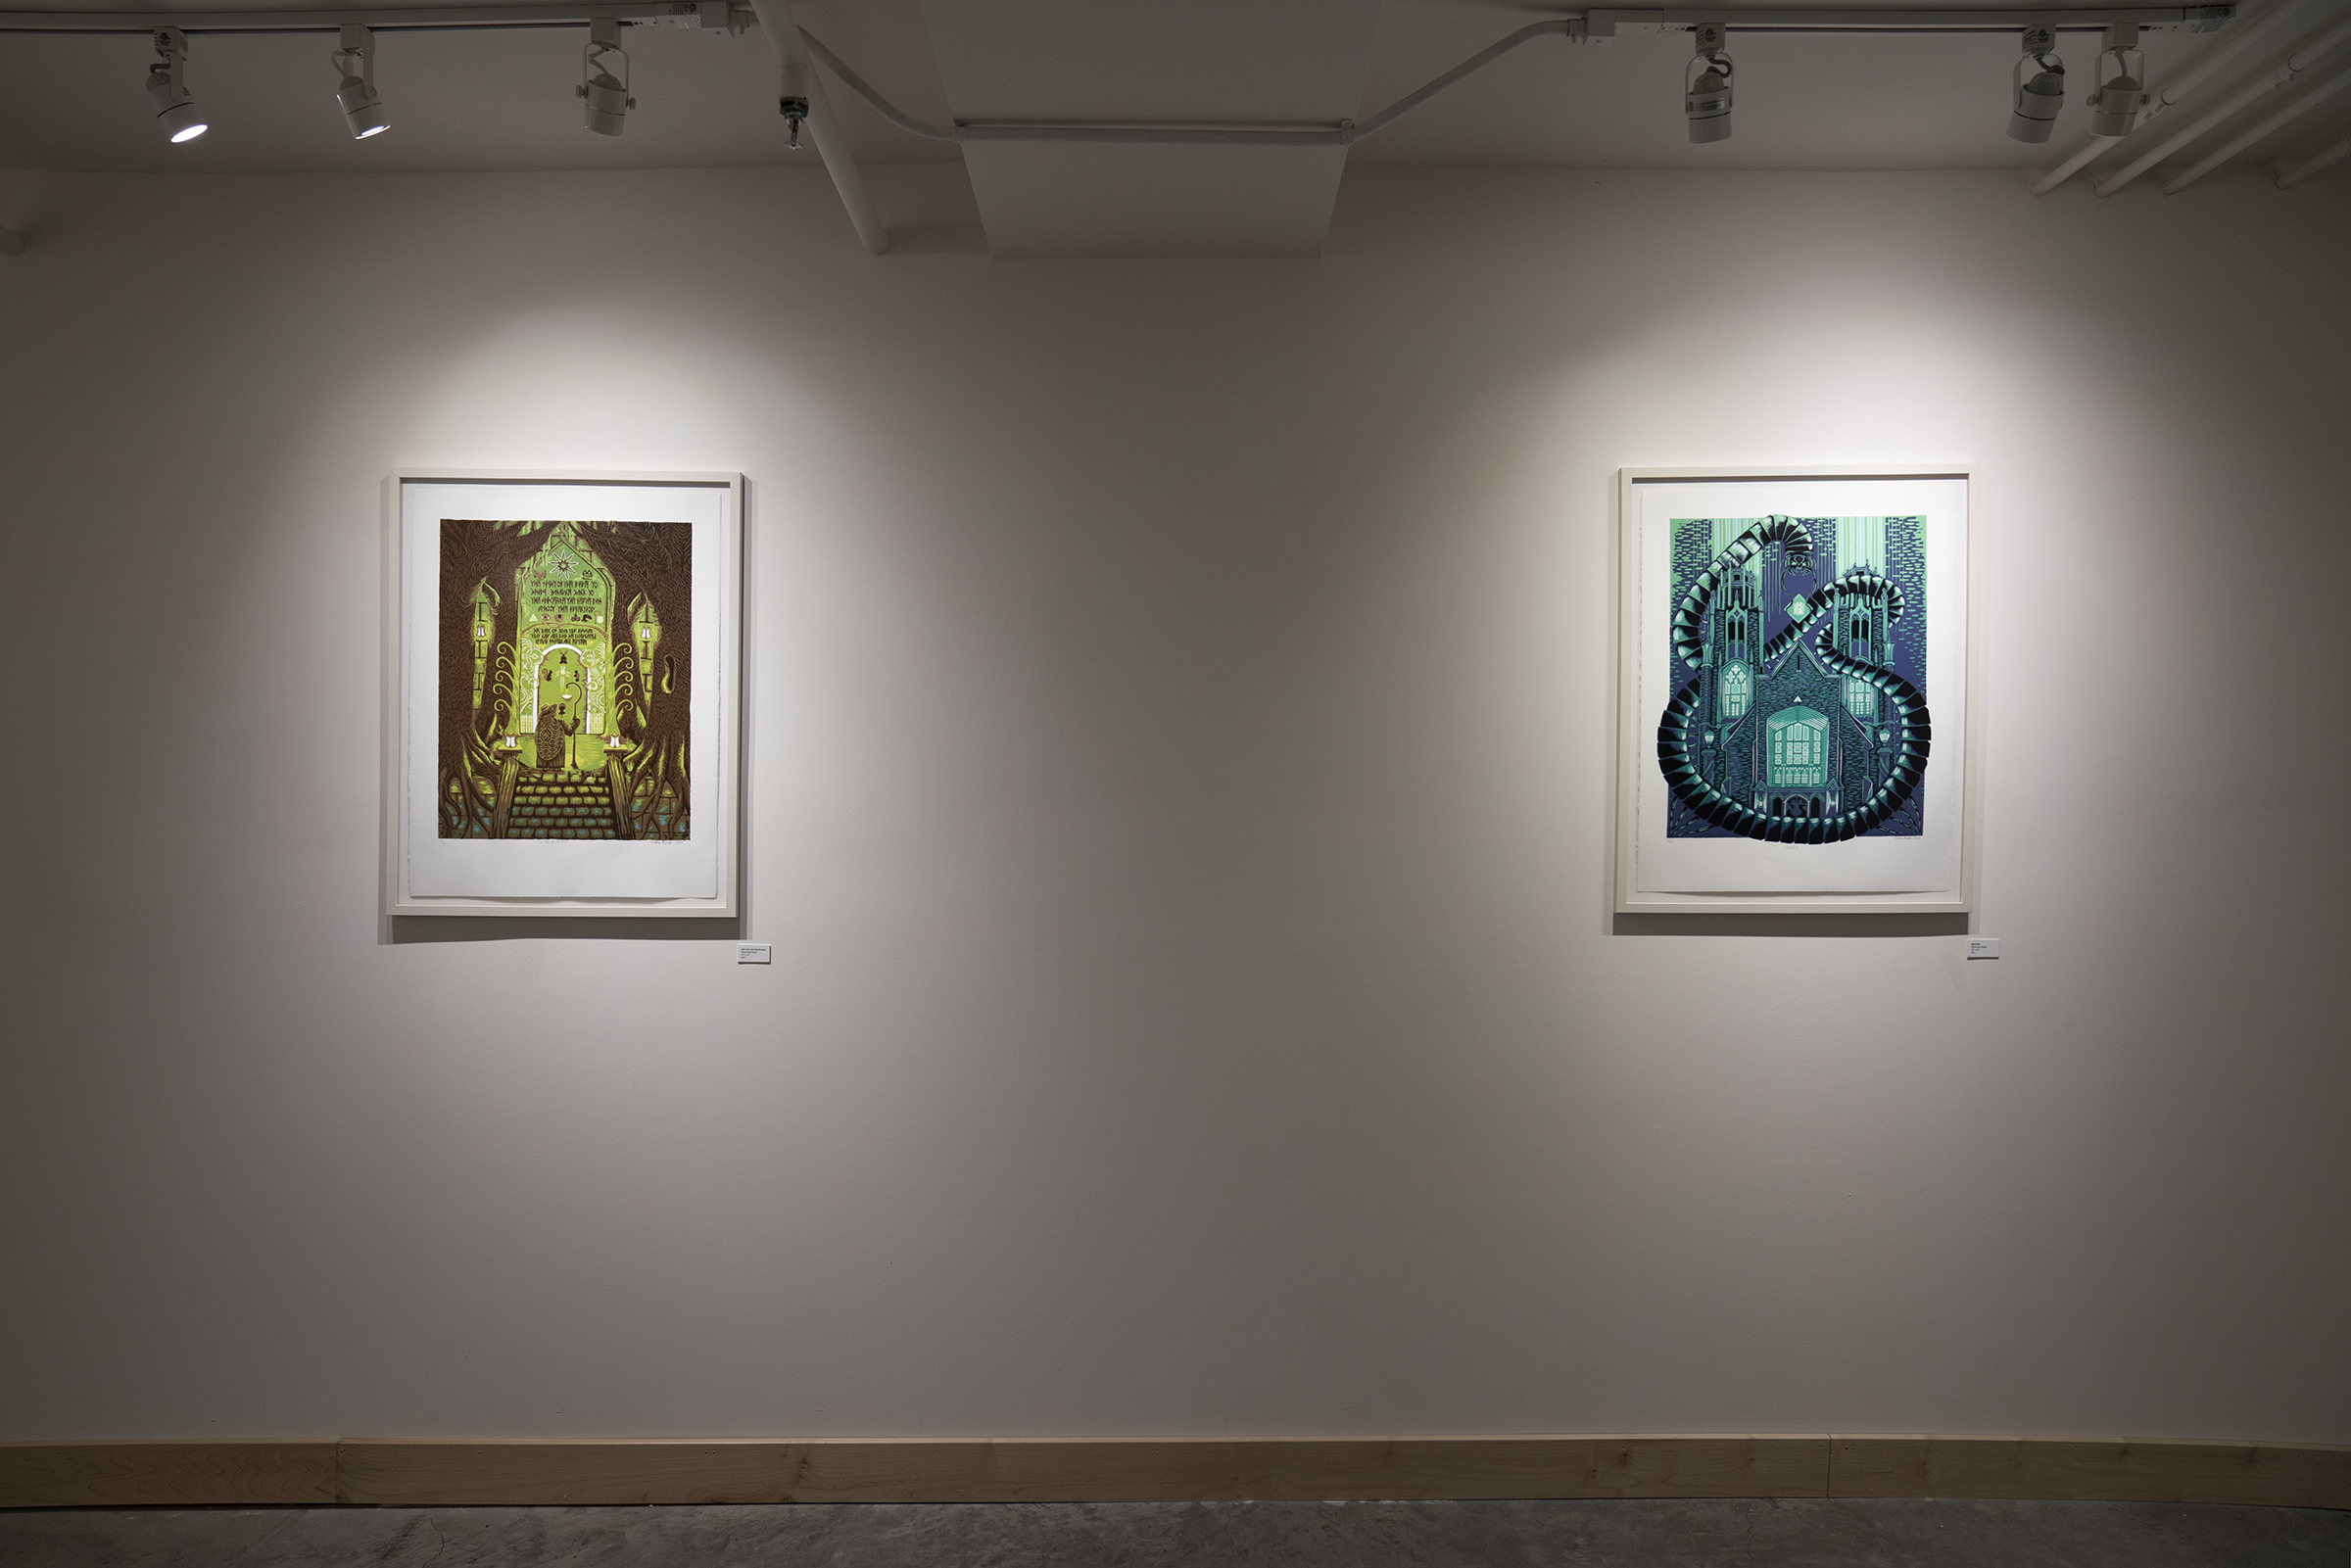 Installation view of The Hallowed Veil Master of Fine Arts Exhibition by Jonathan Byxbe at the Apex Gallery, Tandem Press, University of Wisconsin-Madison.